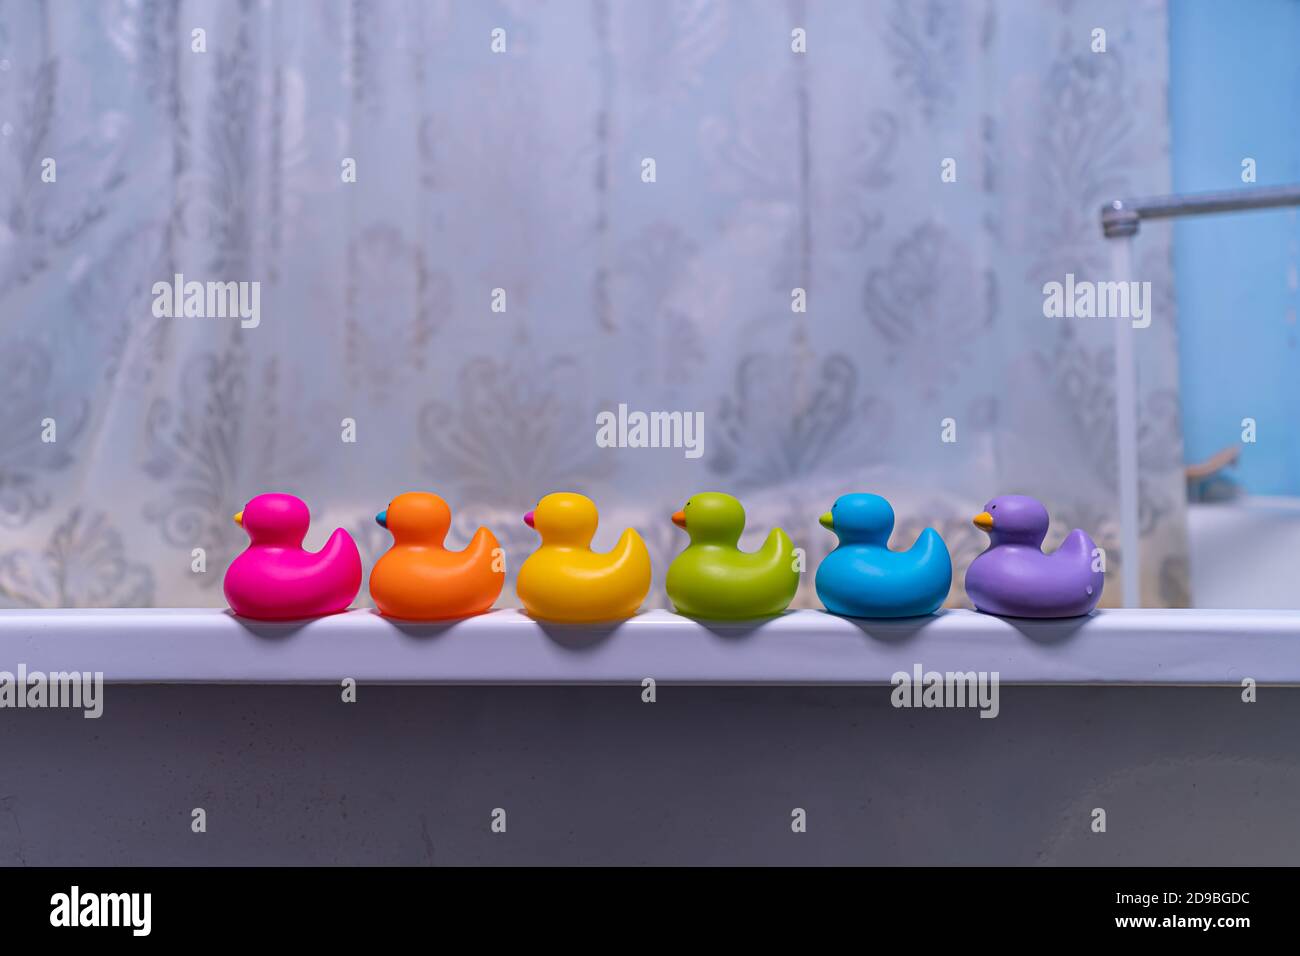 rubber toys in the bathroom, yellow duck and bath decor elements Stock Photo